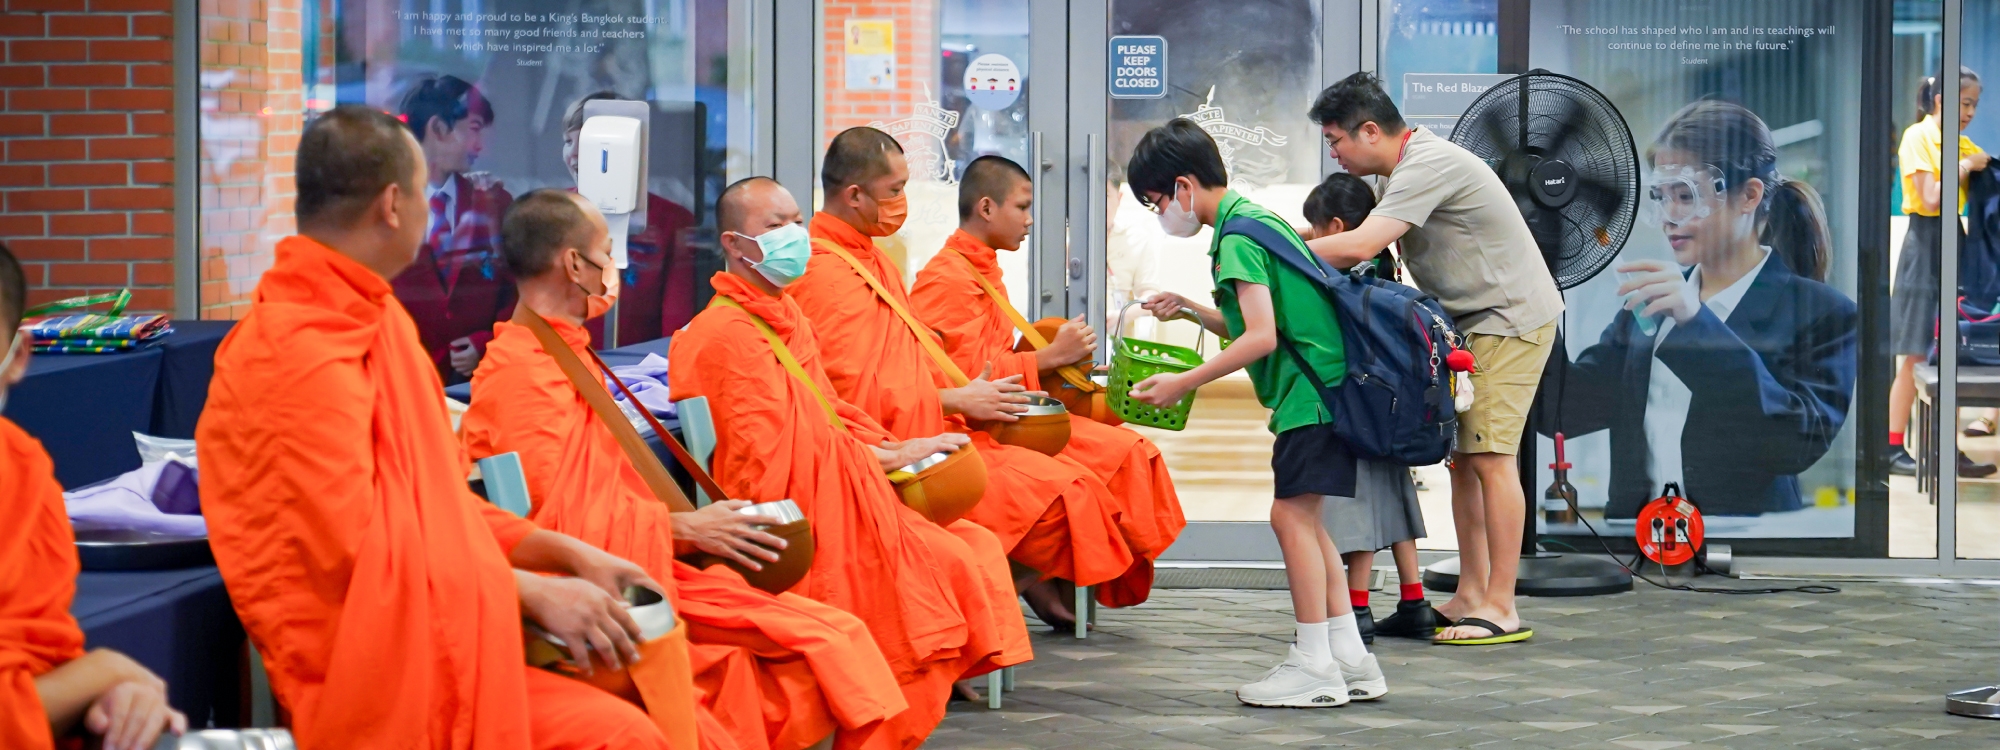 Kindness in Action: “Monthly Alms Offering” at King’s Bangkok!